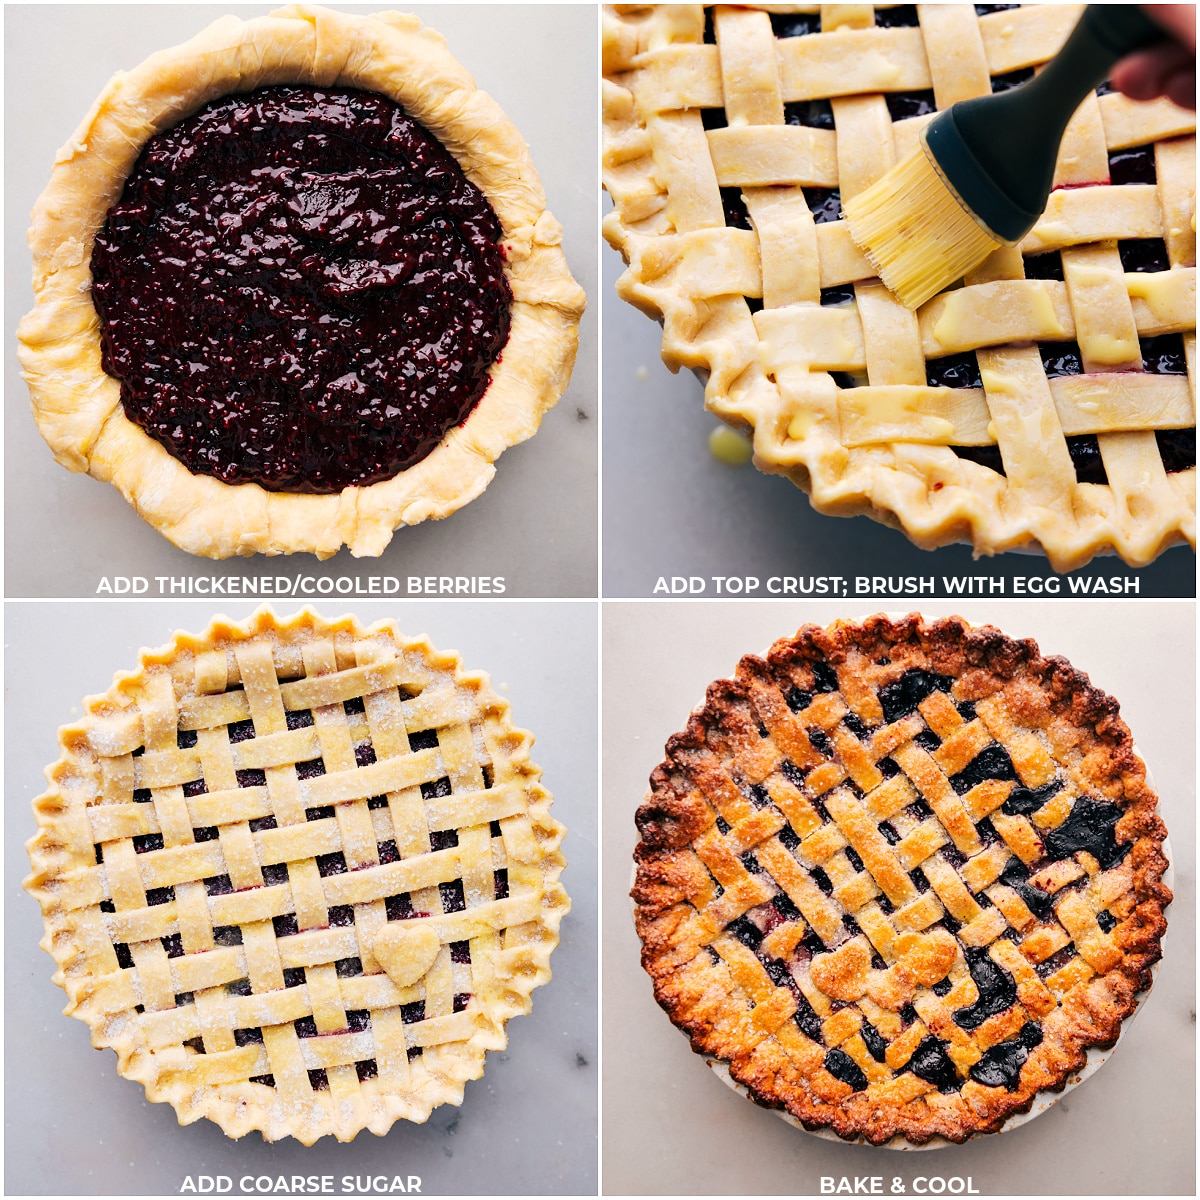 Collage showing filling the pie with the cooled and thickened berries, then adding the crust on top and brushing it with an egg wash and baking the Berry Pie.